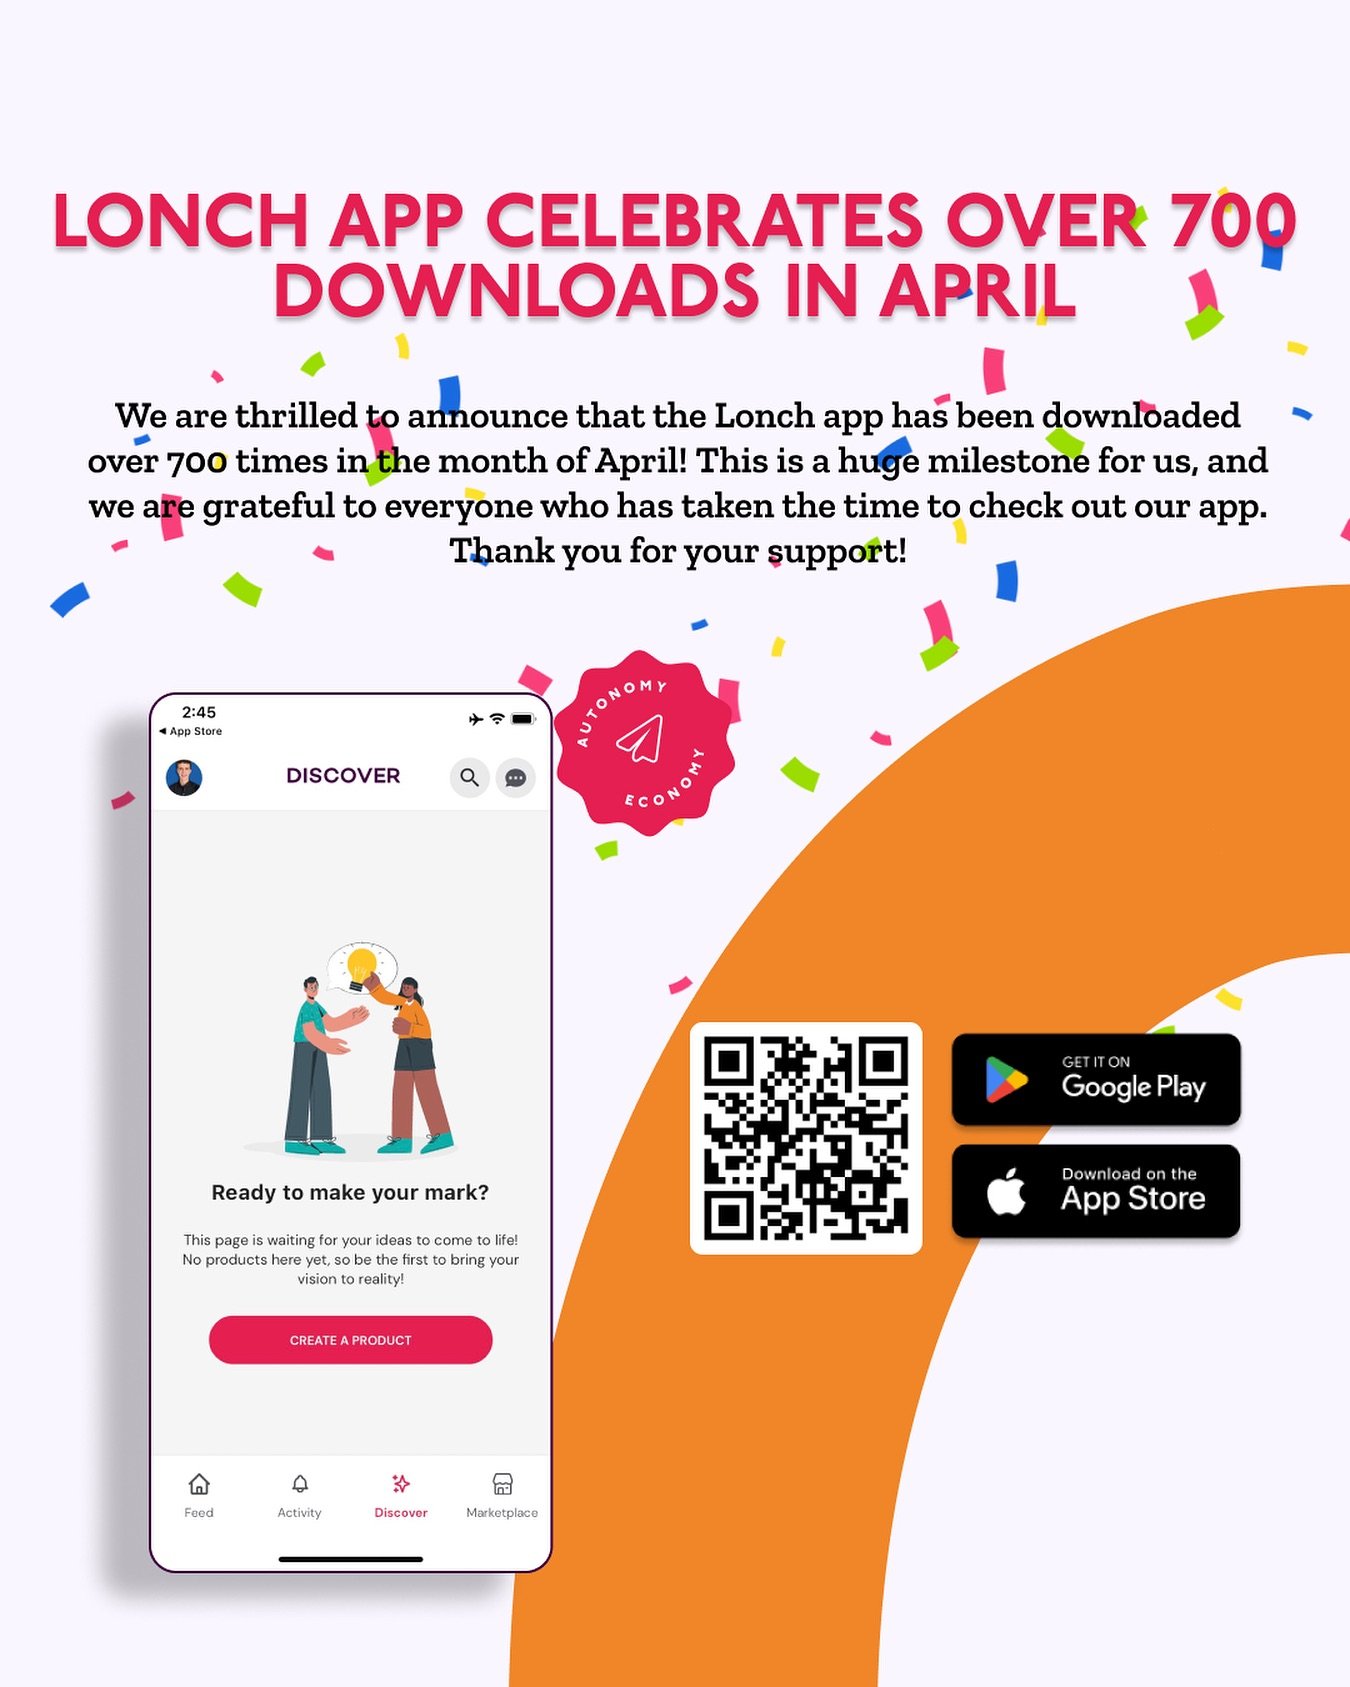 Lonch has hit a major milestone with over 700 downloads in April alone! 📲 Thank you to our amazing community for your incredible support. Let&rsquo;s keep innovating and collaborating!

#celebration 
#appdownloads 
#milestone